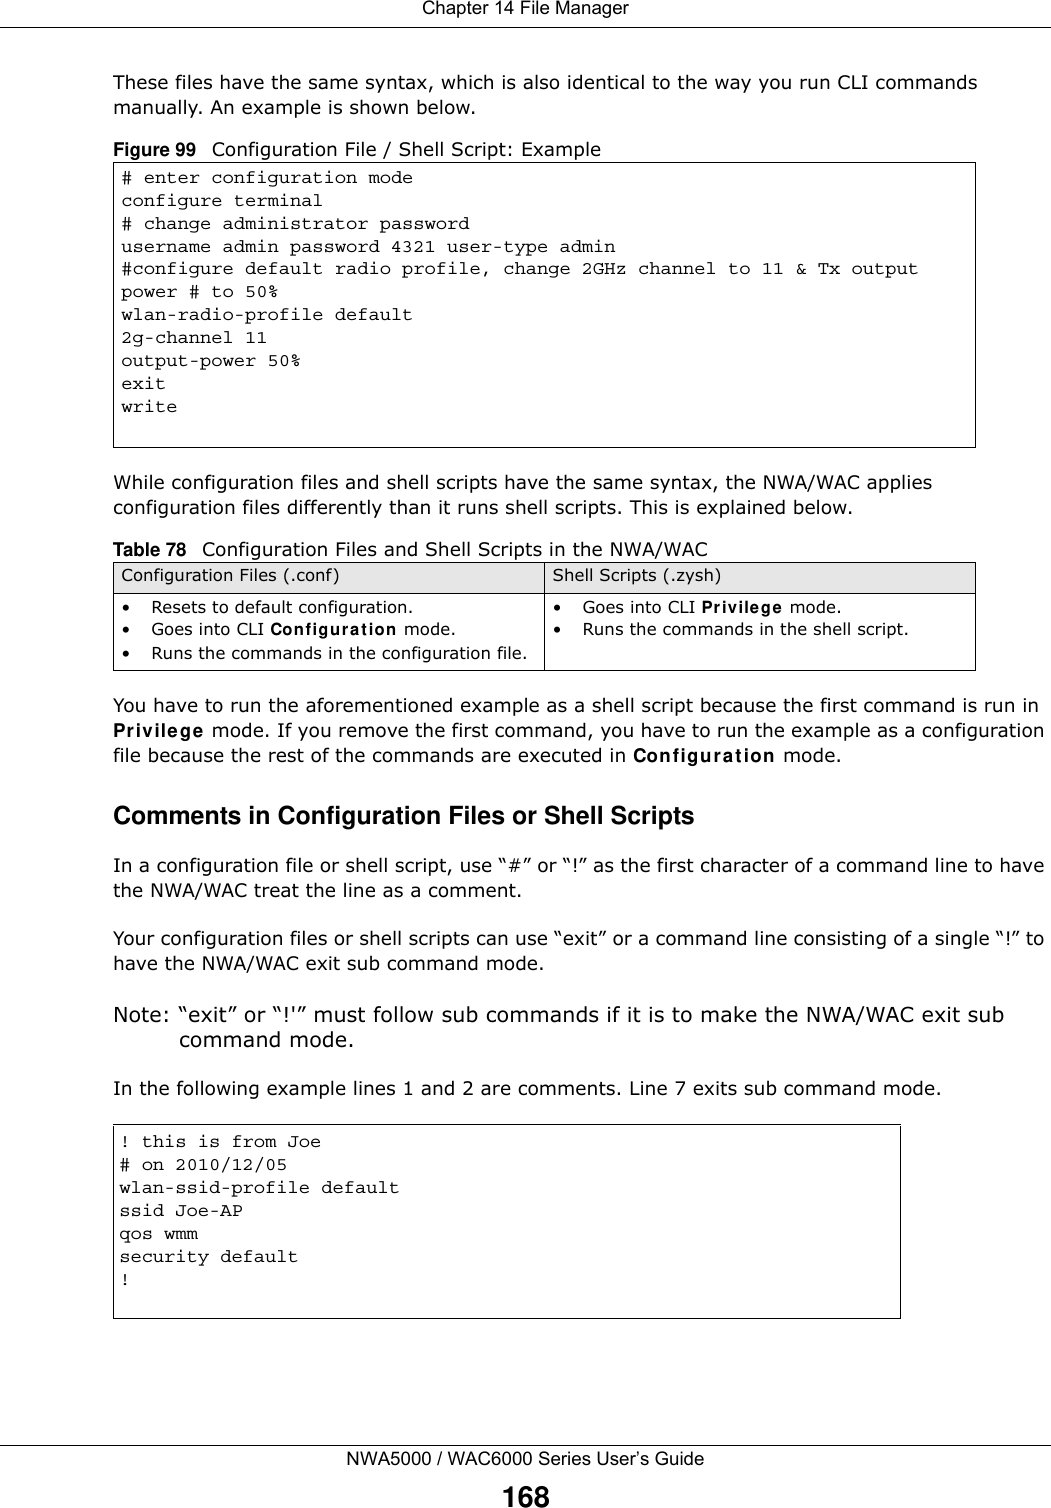 Chapter 14 File ManagerNWA5000 / WAC6000 Series User’s Guide168These files have the same syntax, which is also identical to the way you run CLI commands manually. An example is shown below.  While configuration files and shell scripts have the same syntax, the NWA/WAC applies configuration files differently than it runs shell scripts. This is explained below.You have to run the aforementioned example as a shell script because the first command is run in Privilege mode. If you remove the first command, you have to run the example as a configuration file because the rest of the commands are executed in Configuration mode.Comments in Configuration Files or Shell ScriptsIn a configuration file or shell script, use “#” or “!” as the first character of a command line to have the NWA/WAC treat the line as a comment. Your configuration files or shell scripts can use “exit” or a command line consisting of a single “!” to have the NWA/WAC exit sub command mode.Note: “exit” or “!&apos;” must follow sub commands if it is to make the NWA/WAC exit sub command mode.In the following example lines 1 and 2 are comments. Line 7 exits sub command mode. Figure 99   Configuration File / Shell Script: Example# enter configuration modeconfigure terminal# change administrator passwordusername admin password 4321 user-type admin#configure default radio profile, change 2GHz channel to 11 &amp; Tx output power # to 50%wlan-radio-profile default2g-channel 11output-power 50%exitwriteTable 78   Configuration Files and Shell Scripts in the NWA/WACConfiguration Files (.conf) Shell Scripts (.zysh)• Resets to default configuration.•Goes into CLI Configuration mode.• Runs the commands in the configuration file.•Goes into CLI Privilege mode.• Runs the commands in the shell script.! this is from Joe# on 2010/12/05wlan-ssid-profile defaultssid Joe-APqos wmmsecurity default!